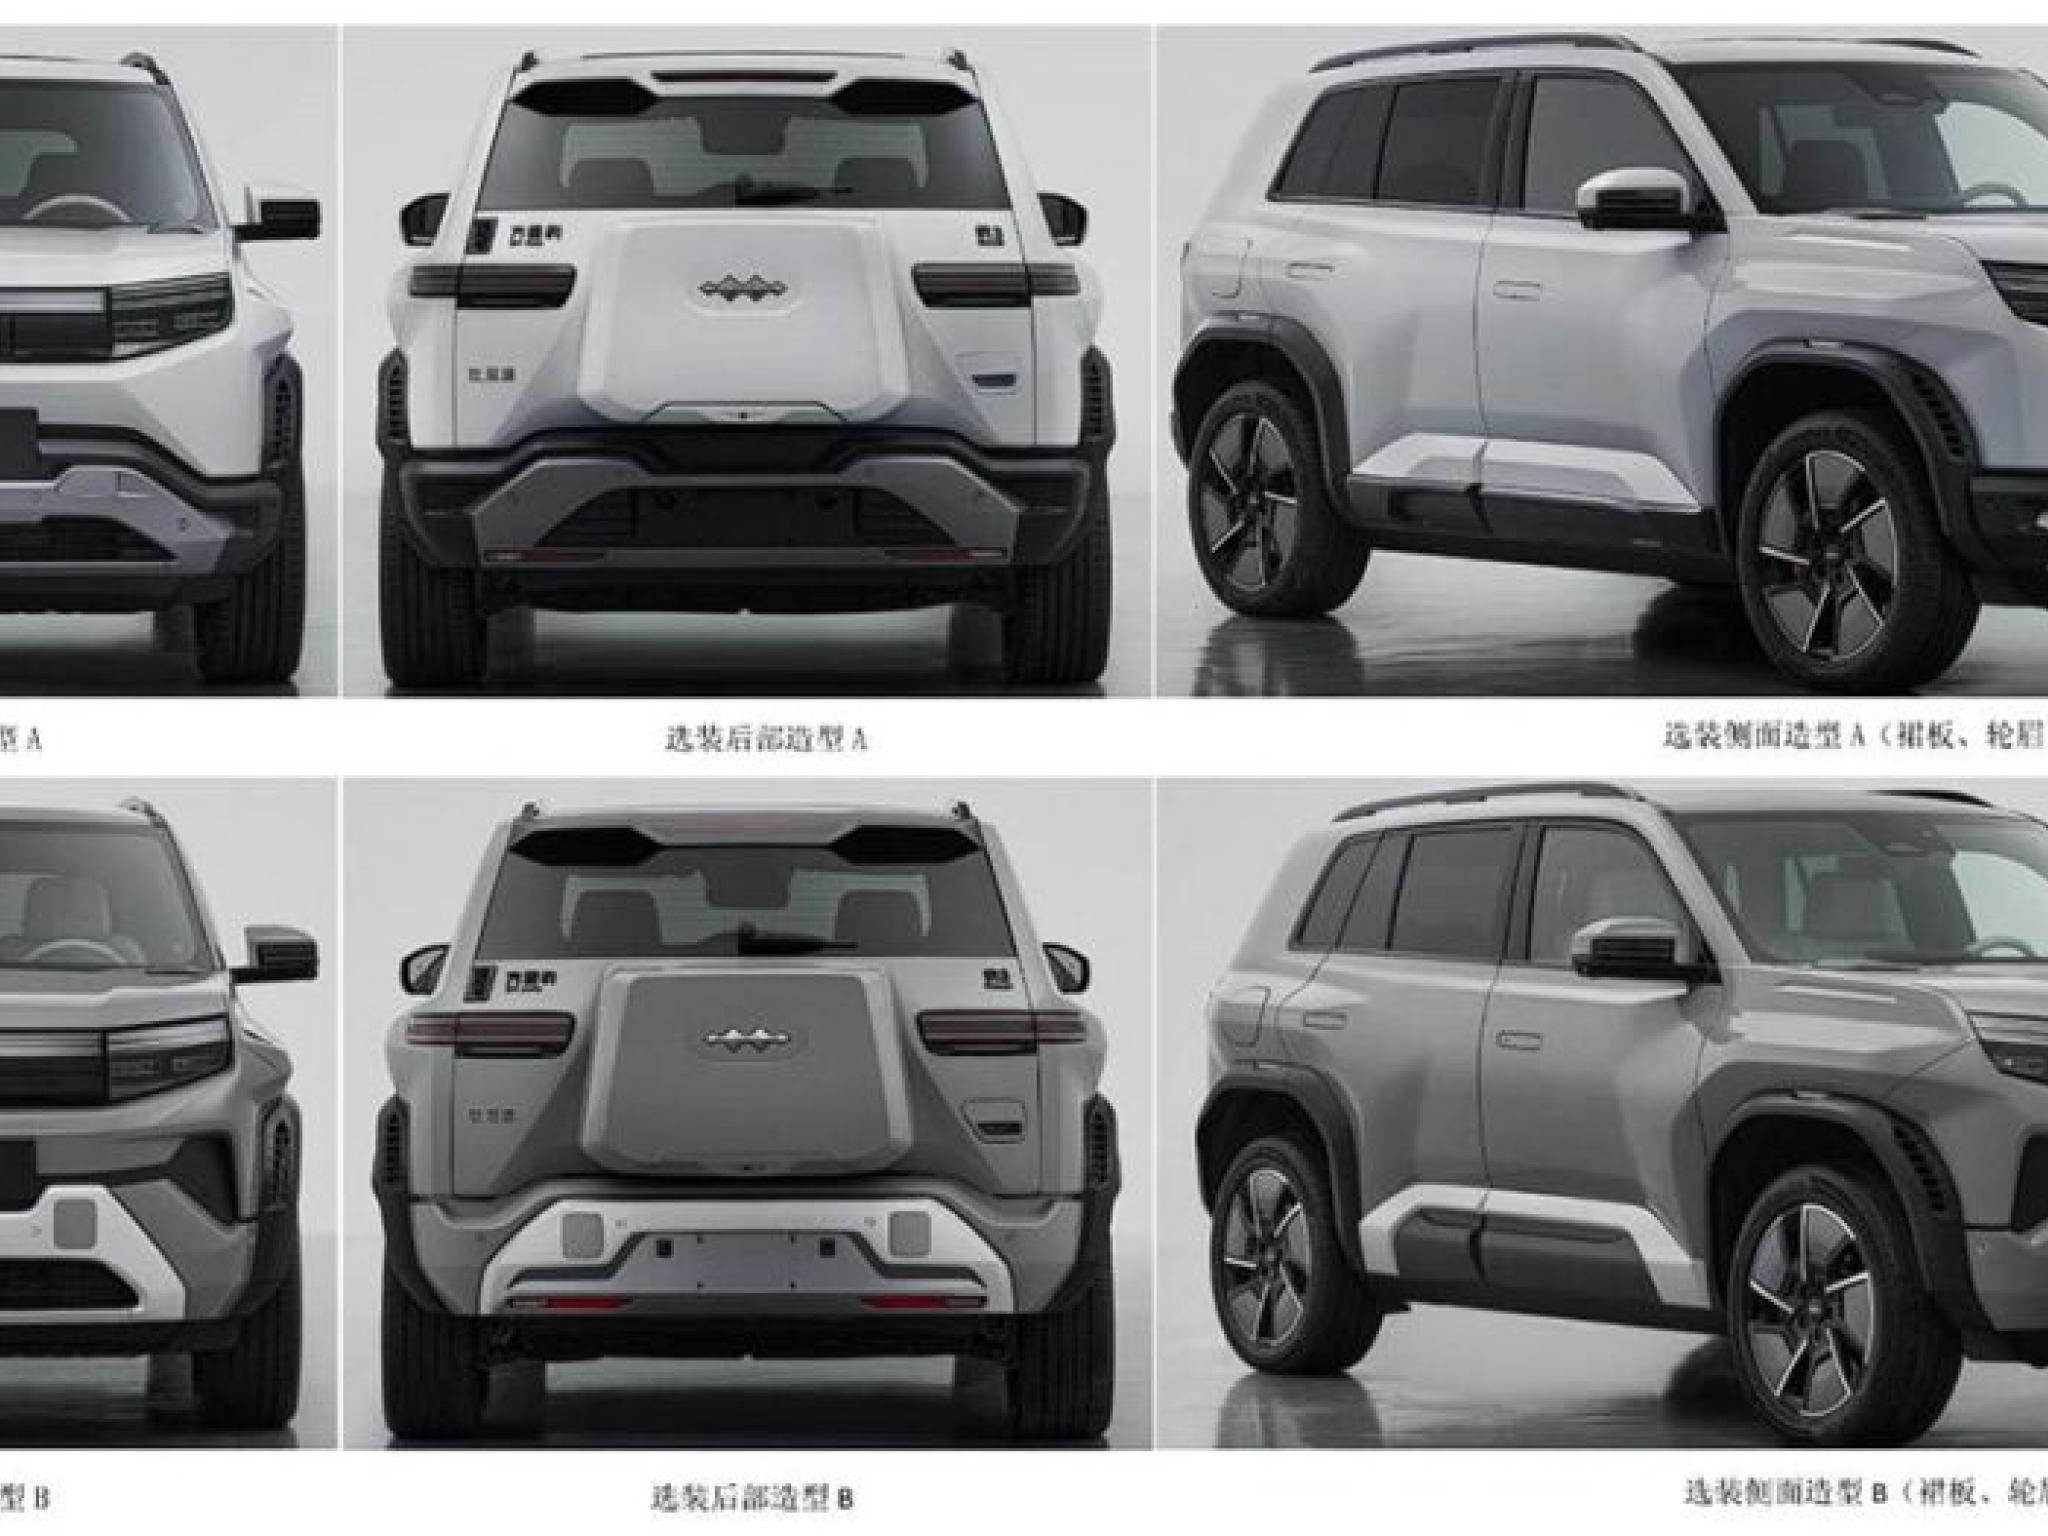  teslas-top-rival-byd-unveils-latest-ev-model-under-fang-cheng-bao-lineup-report 